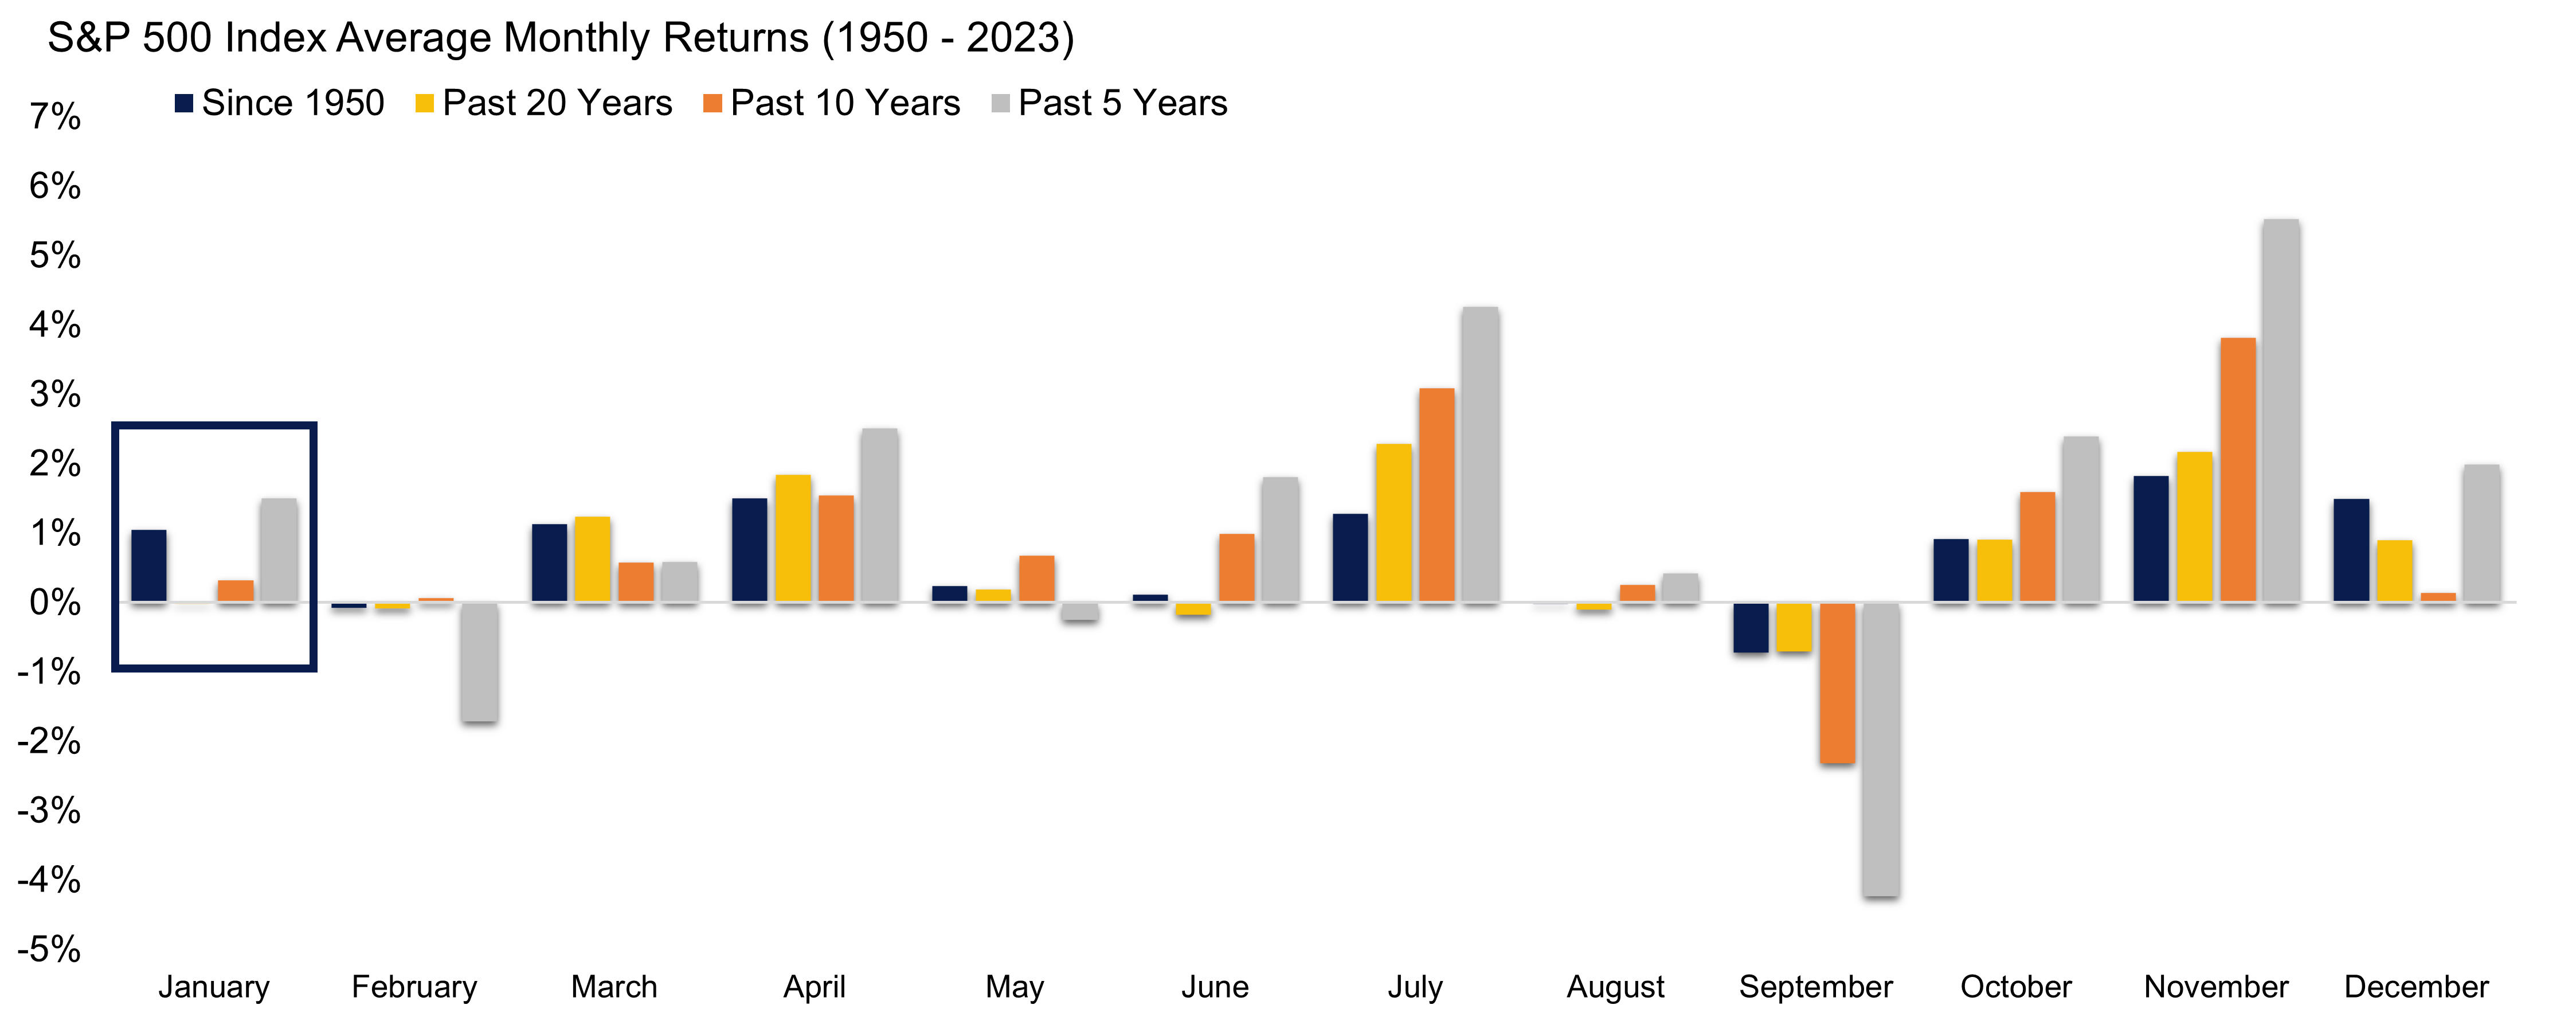 Bar graph of S&P 500 Index average monthly returns from 1950 to 2023 depicting strong momentum for December the last five years as described above. 